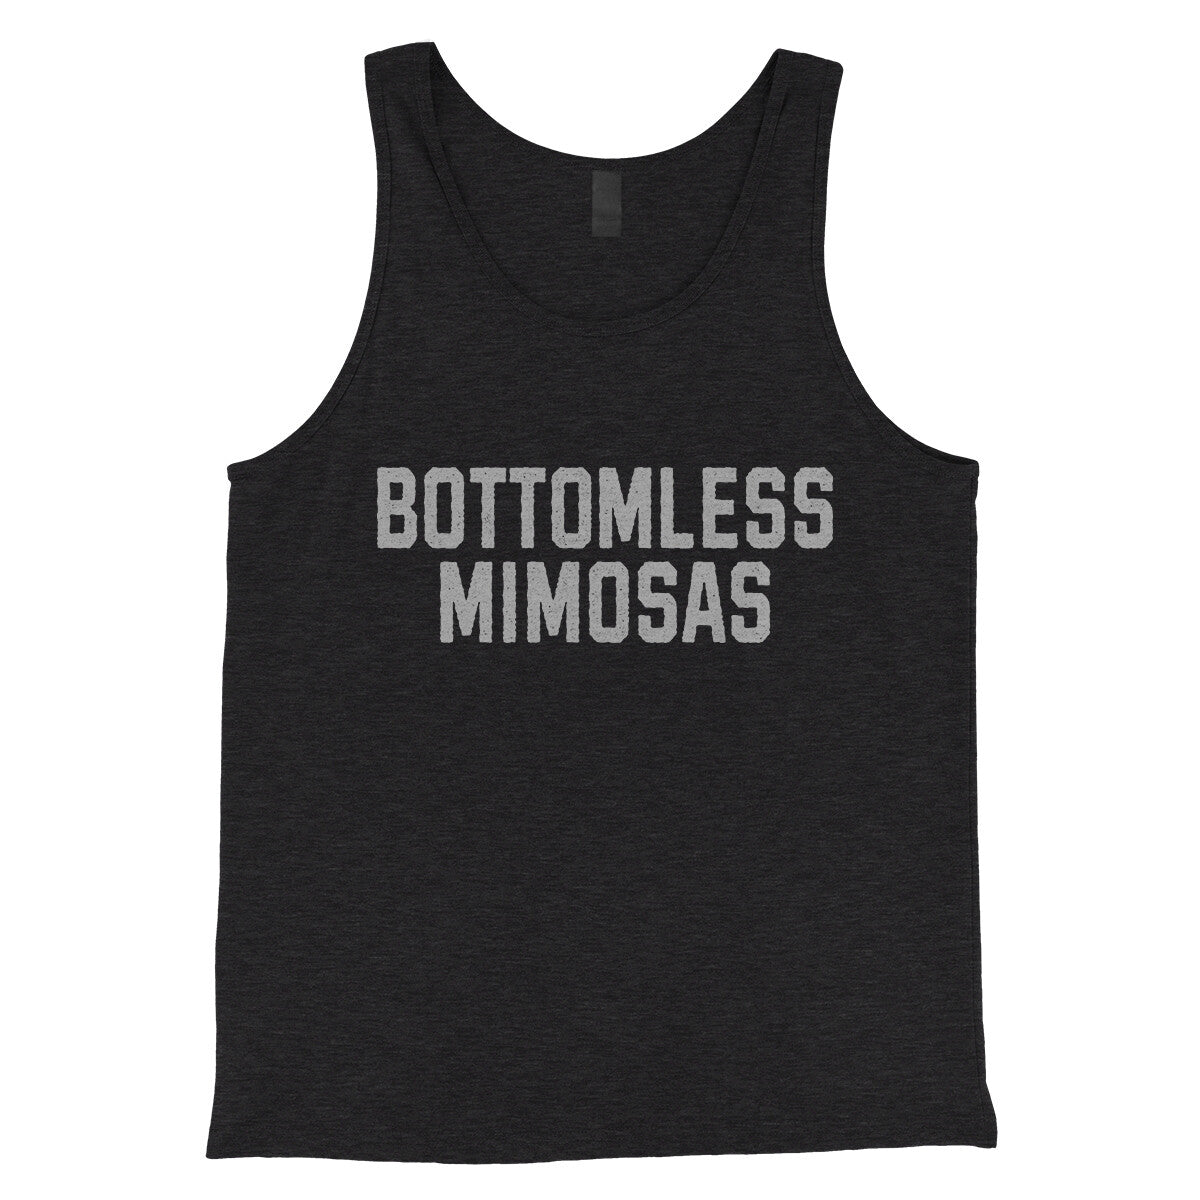 Bottomless Mimosas in Charcoal Black TriBlend Color